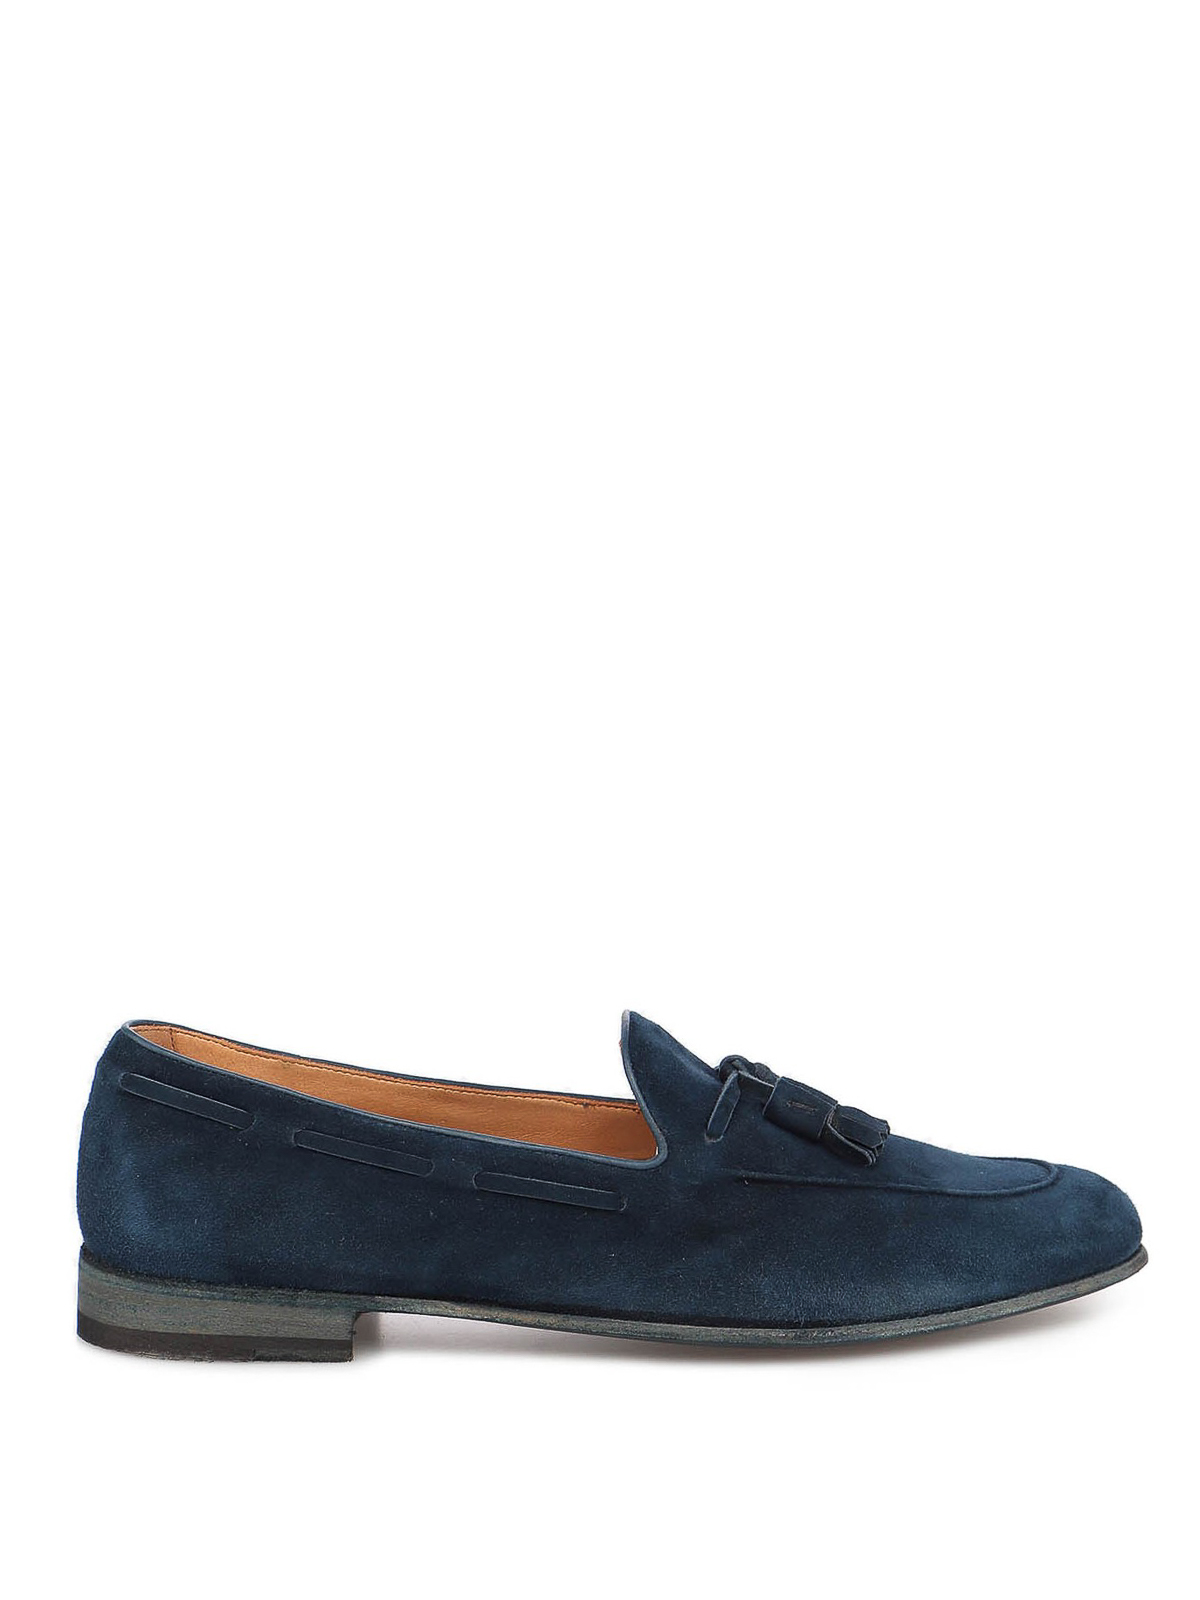 FRATELLI ROSSETTI KENNER SUEDE LOAFERS